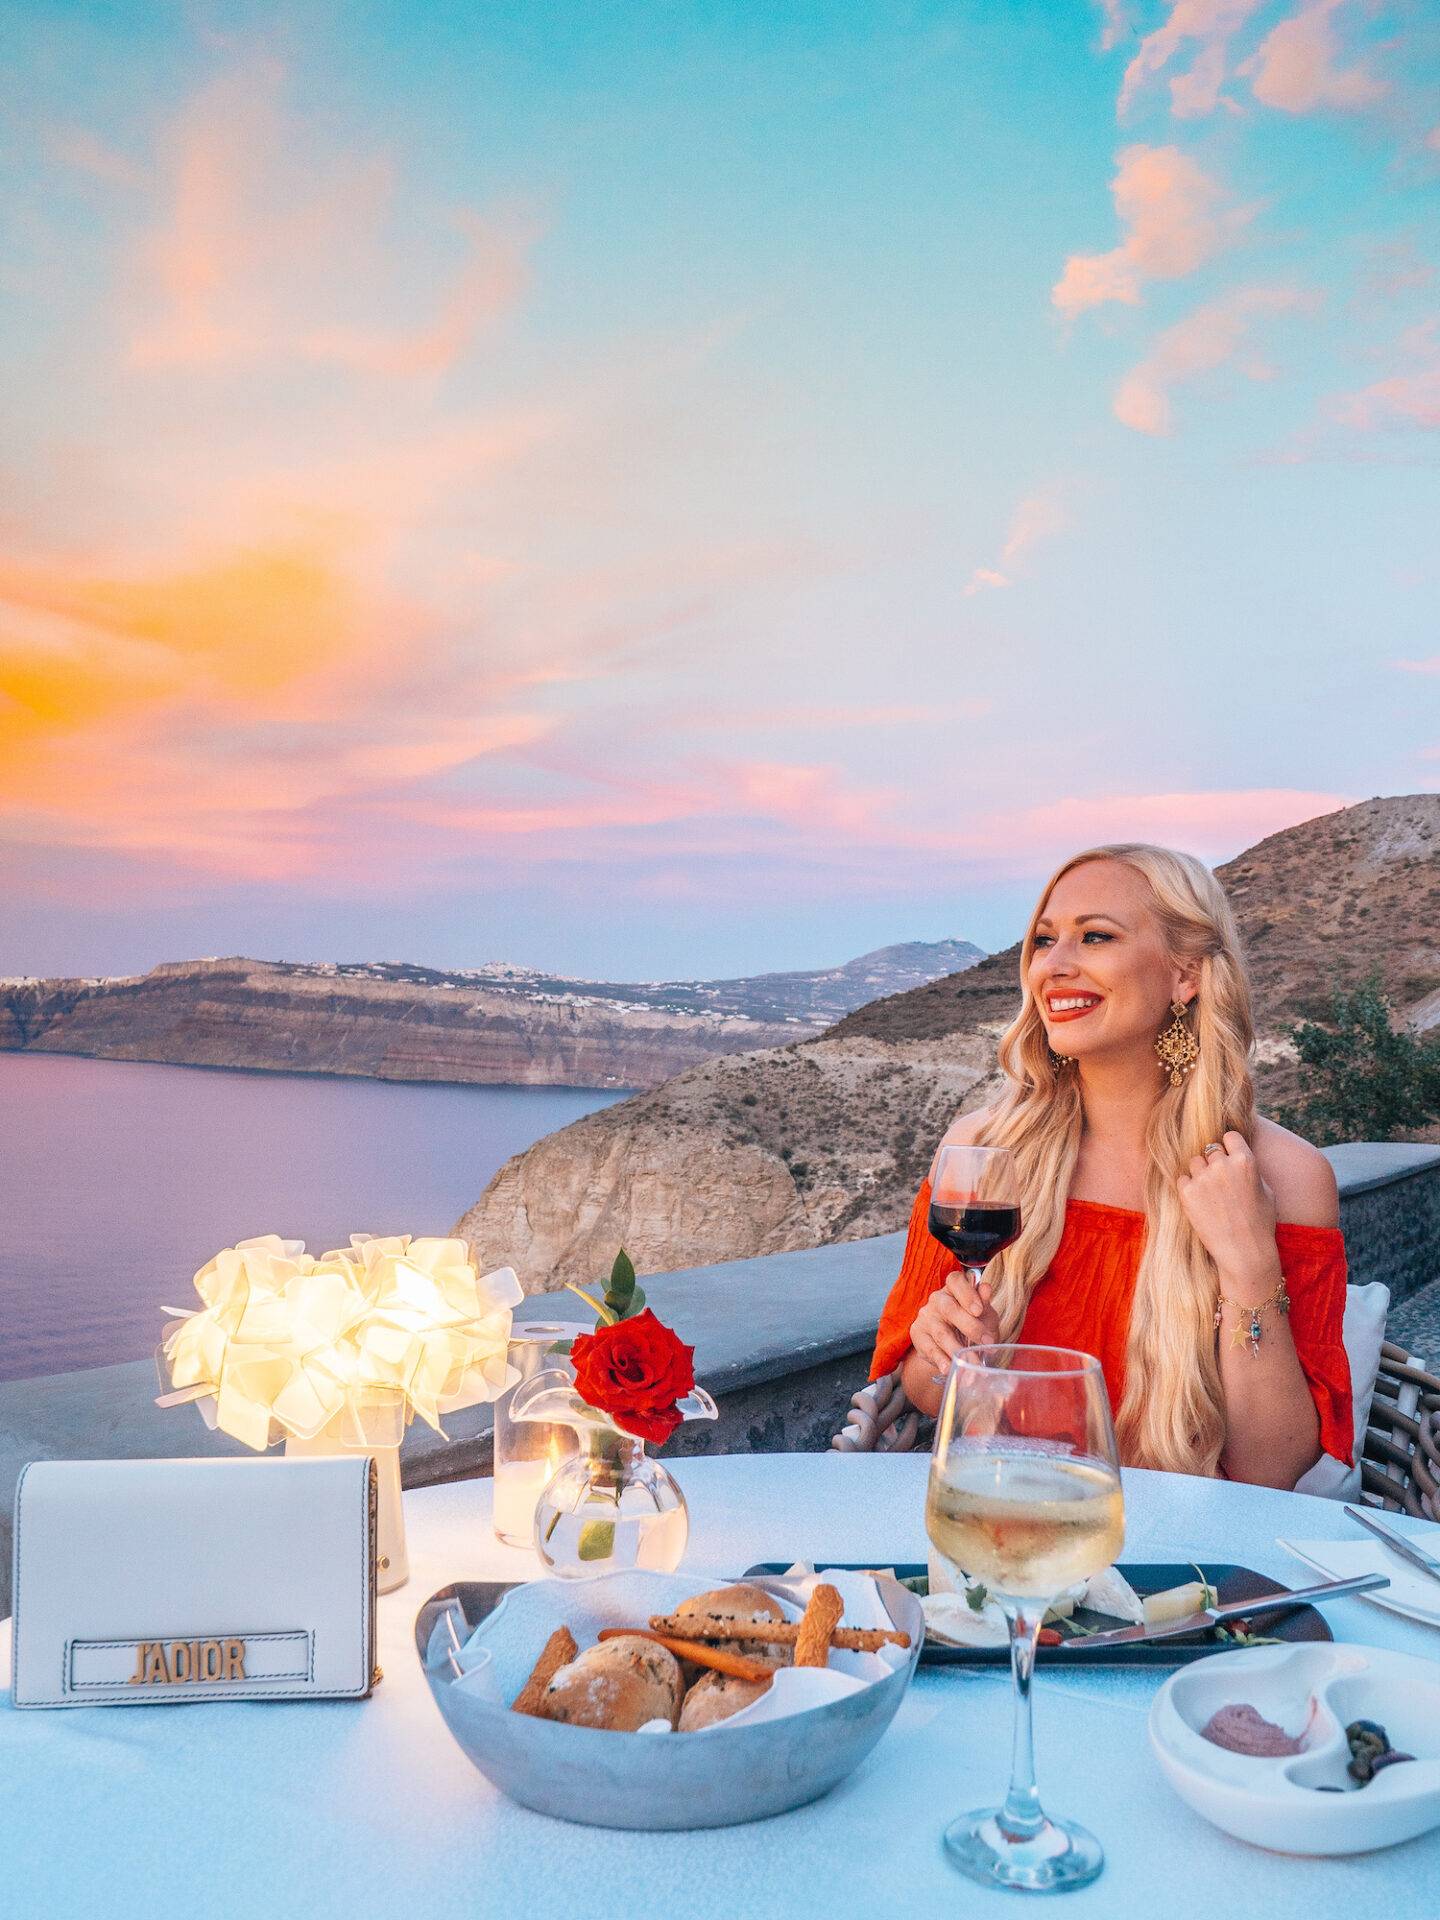 The best photo spots and most instagrammable places in Santorini: Astarte Suites in Akrotiri. Click the photo to see the rest of my list of the best instagram photo spots in Santorini!